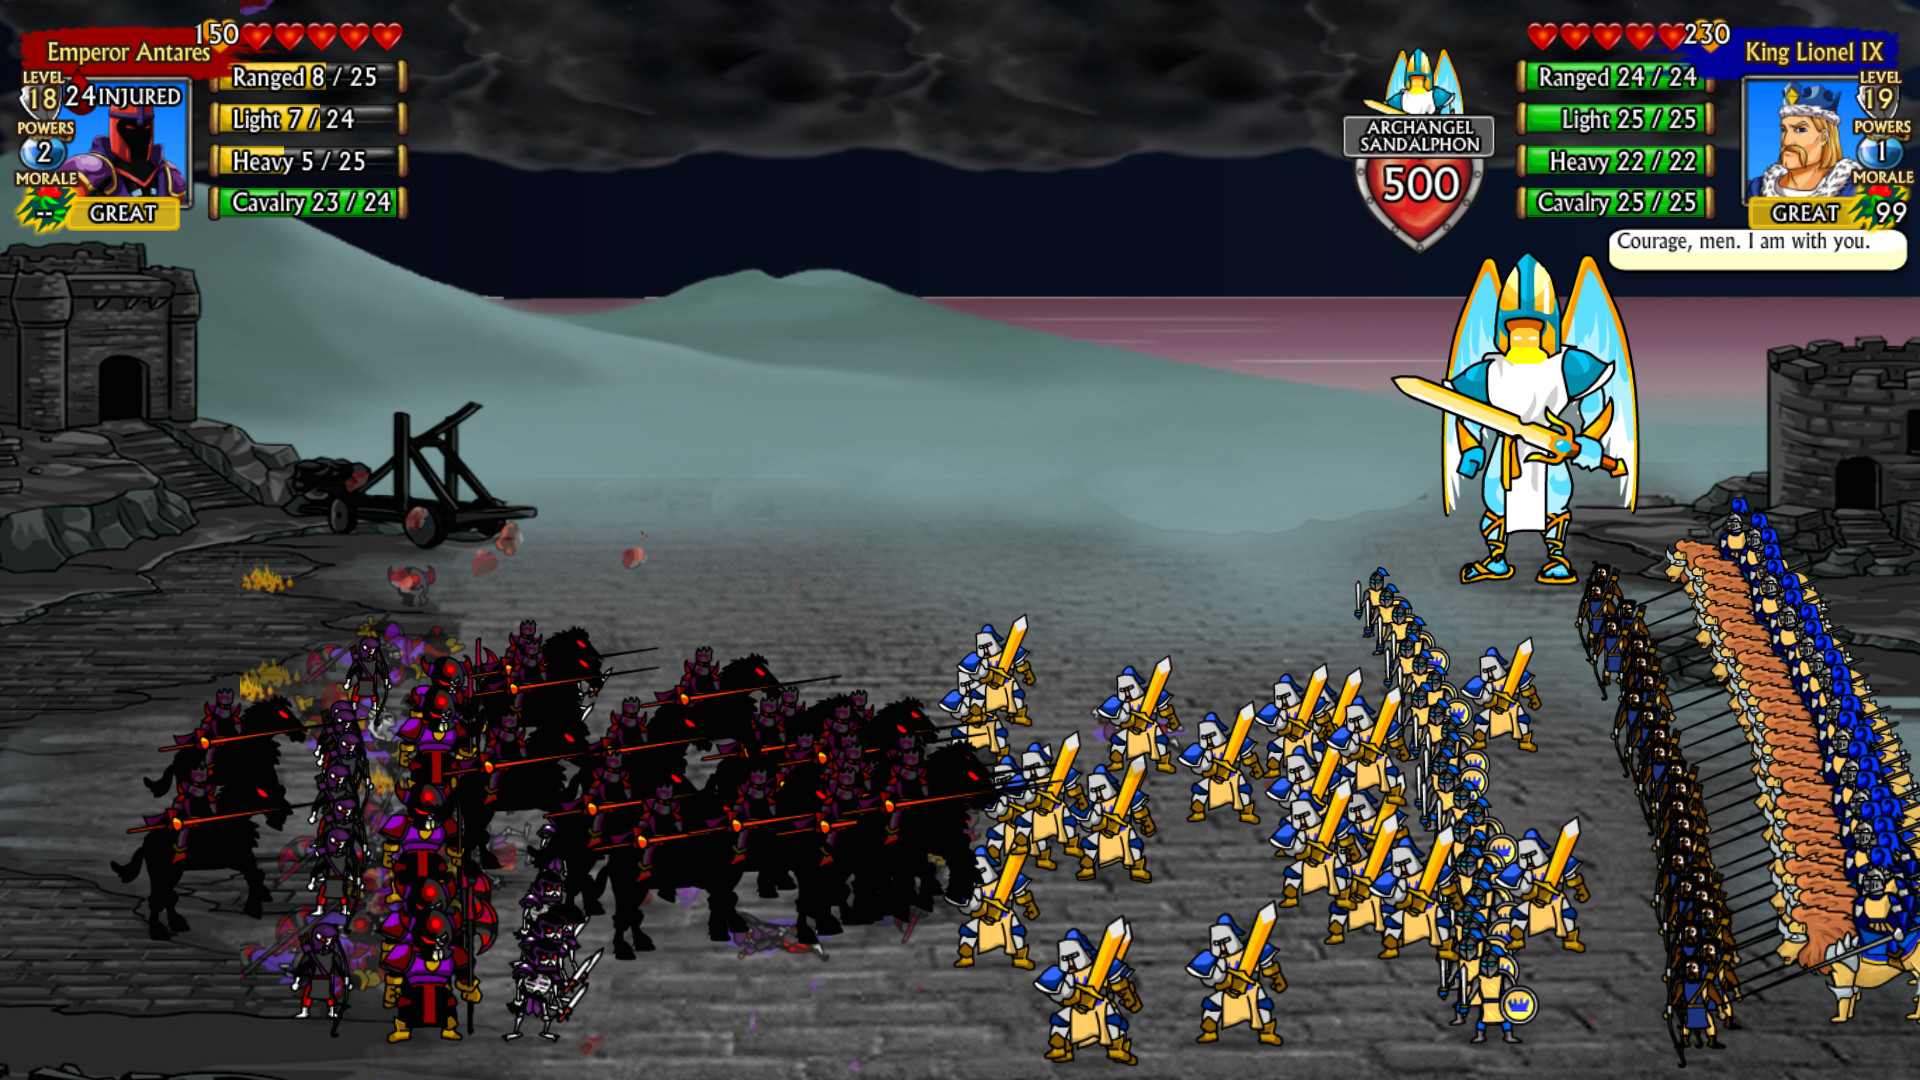 Swords and Sandals Crusader Redux on Steam